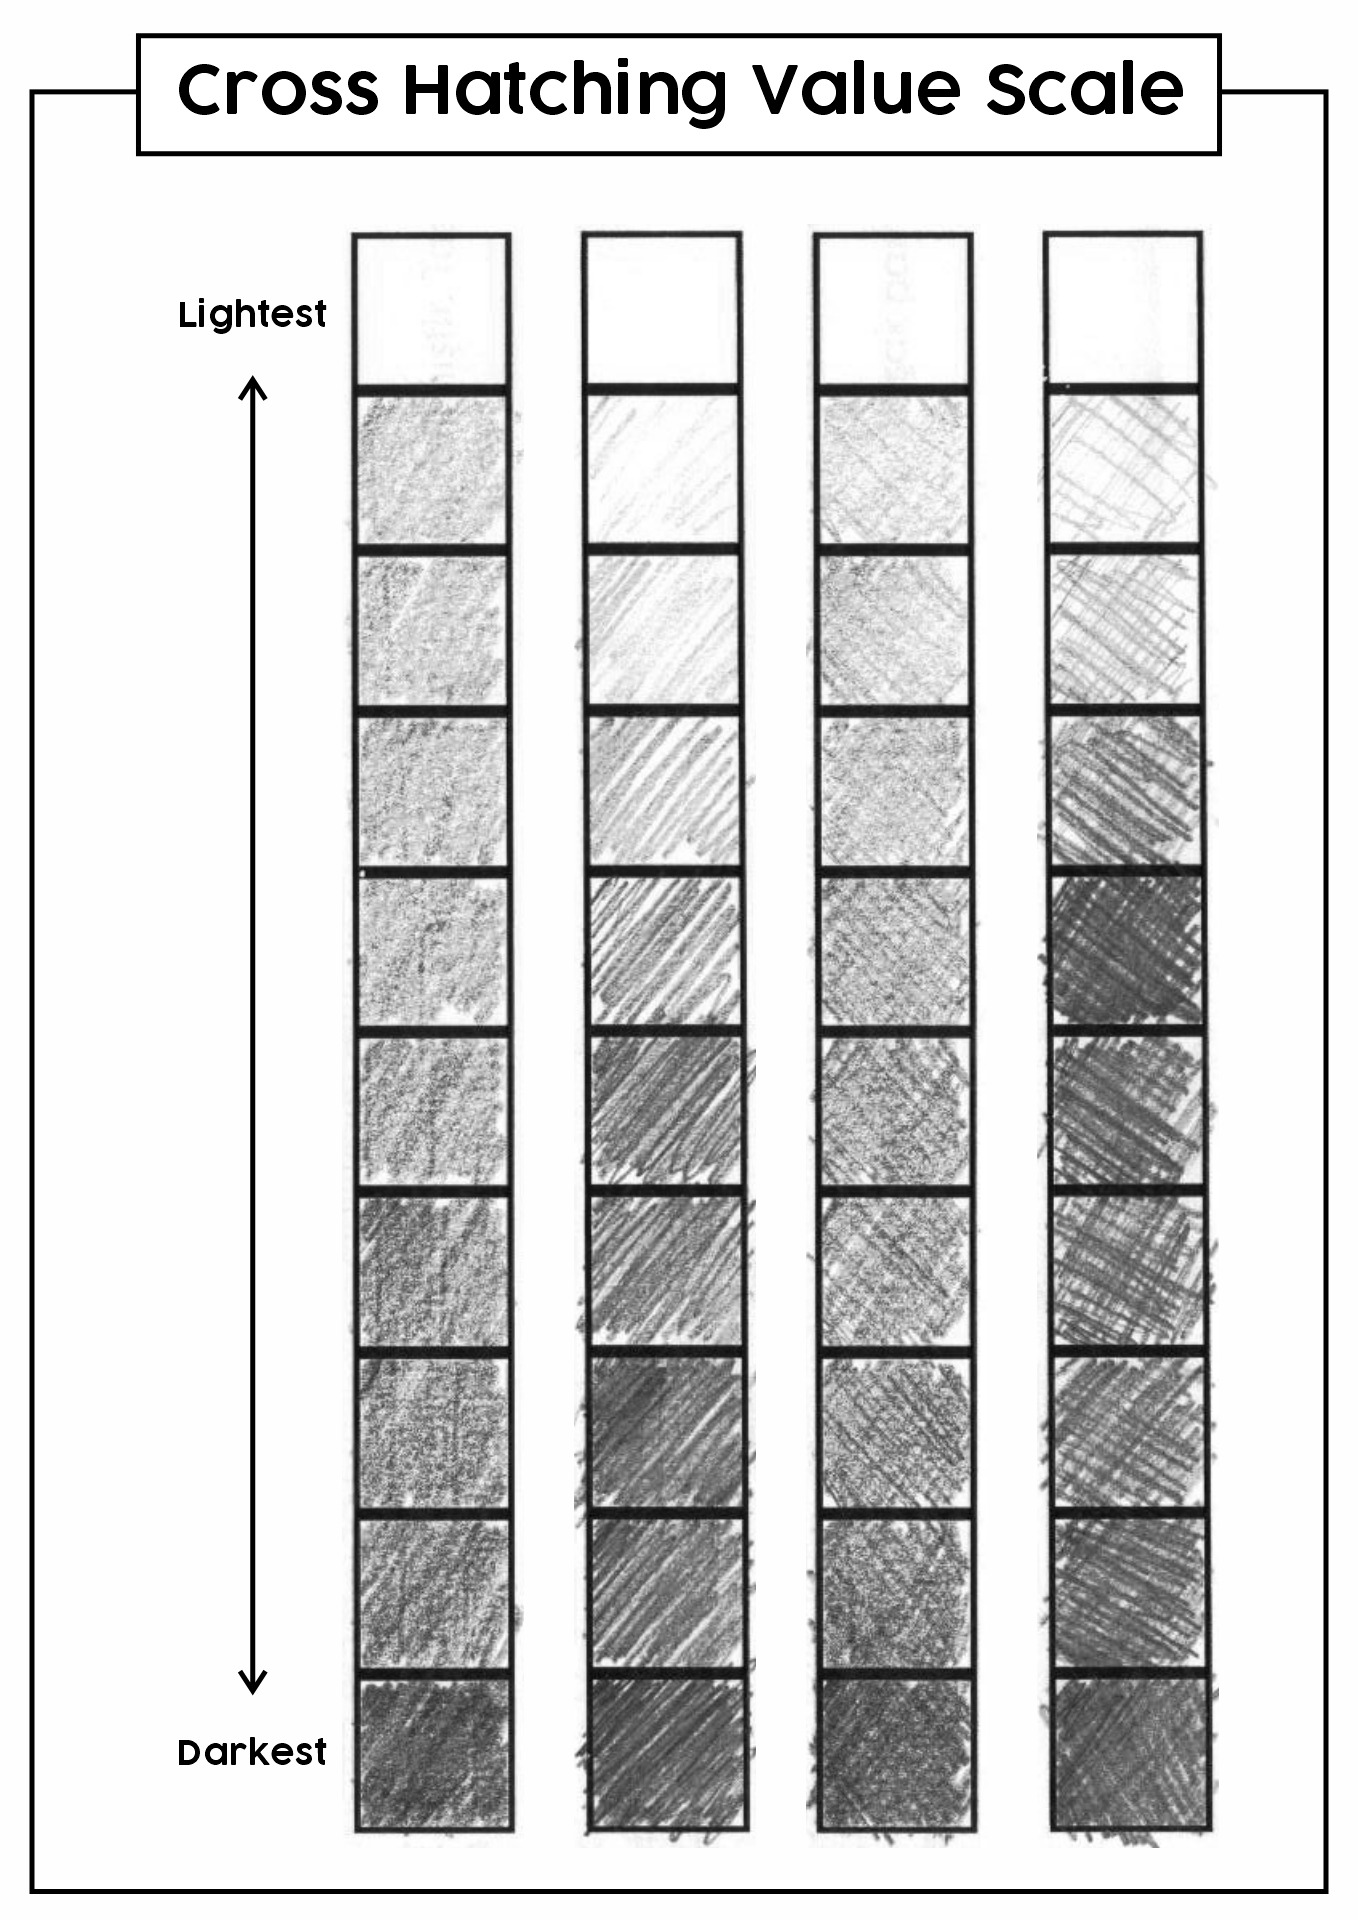 Cross-Hatching Value Scale Image